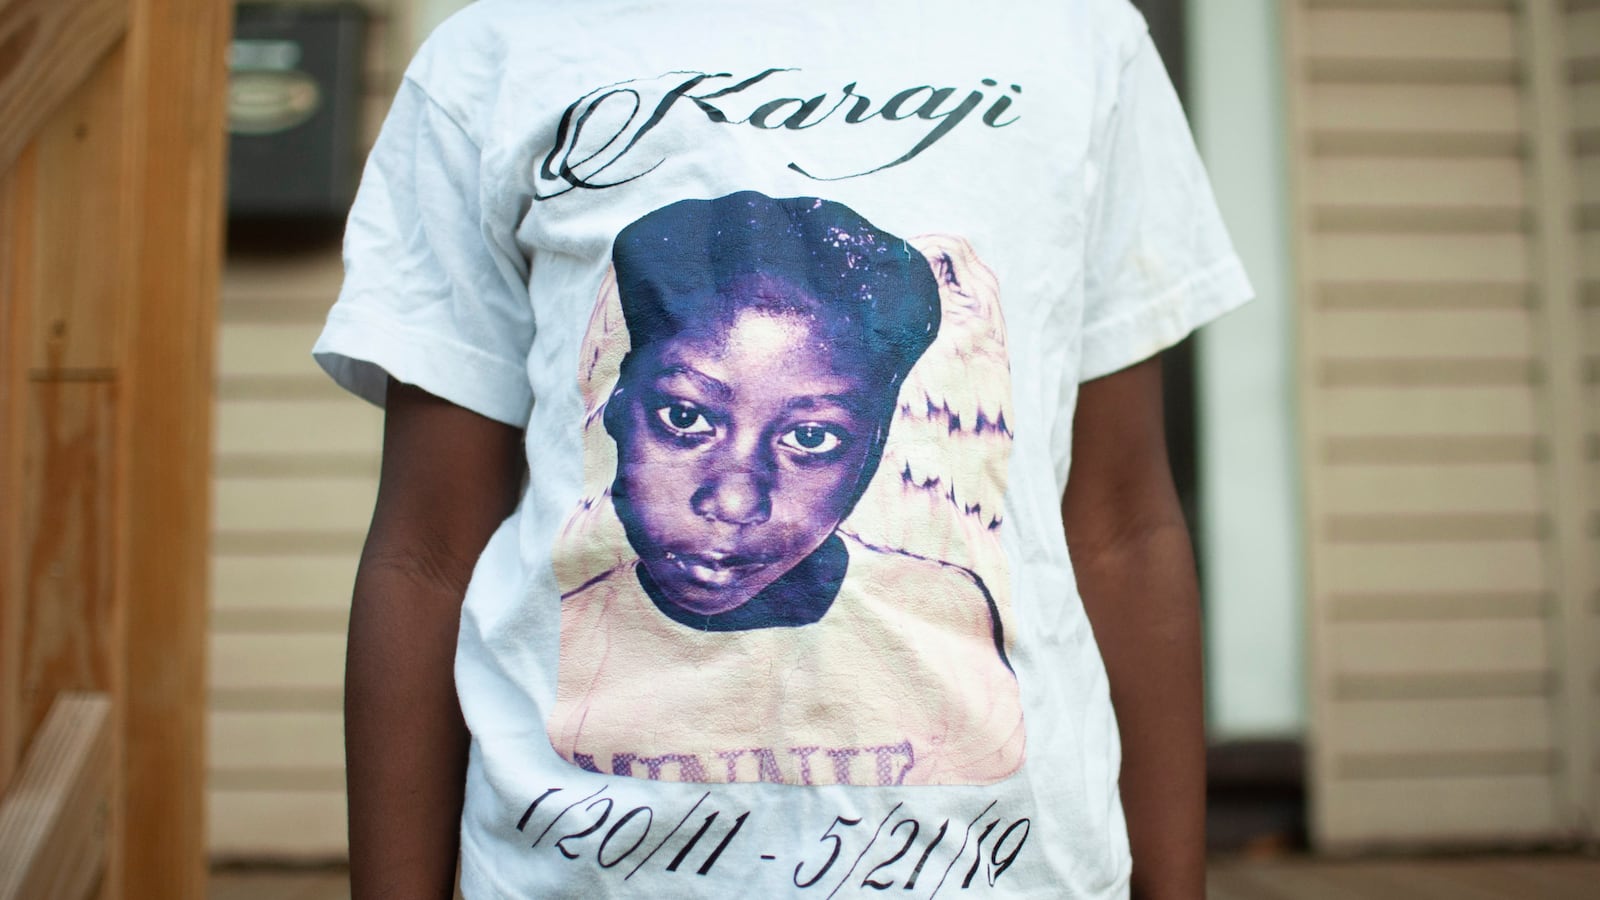 Amayi Jones wears a shirt that memorializes her twin sister, Karaji, who died after a severe asthma attack in May.